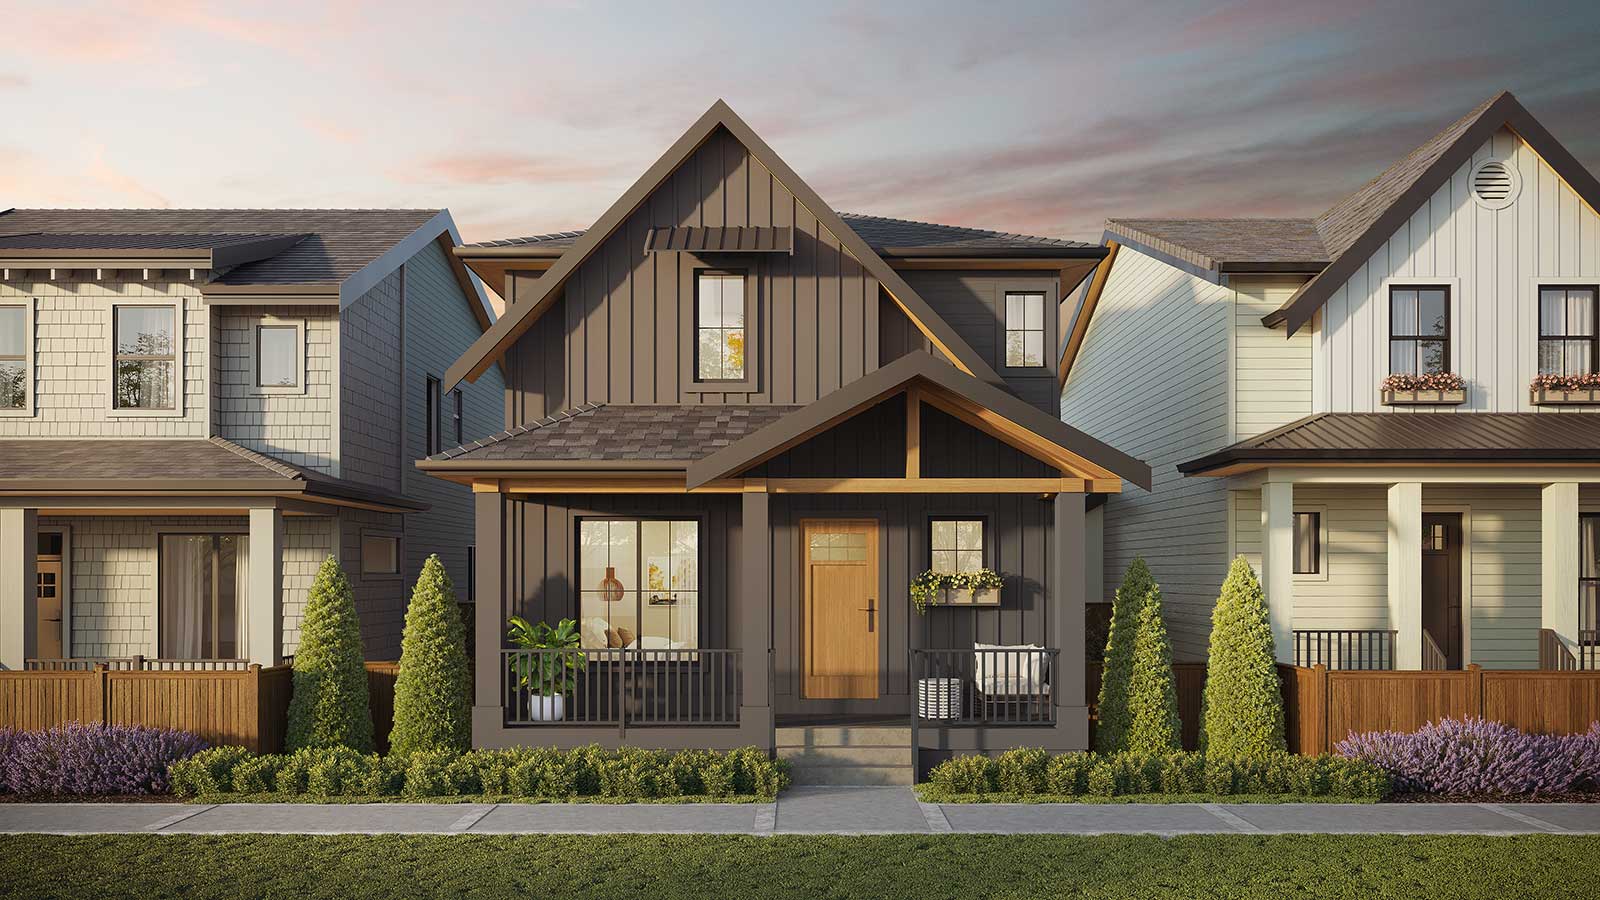 A collection of carefully-crafted Langley homes set around a pondside park.